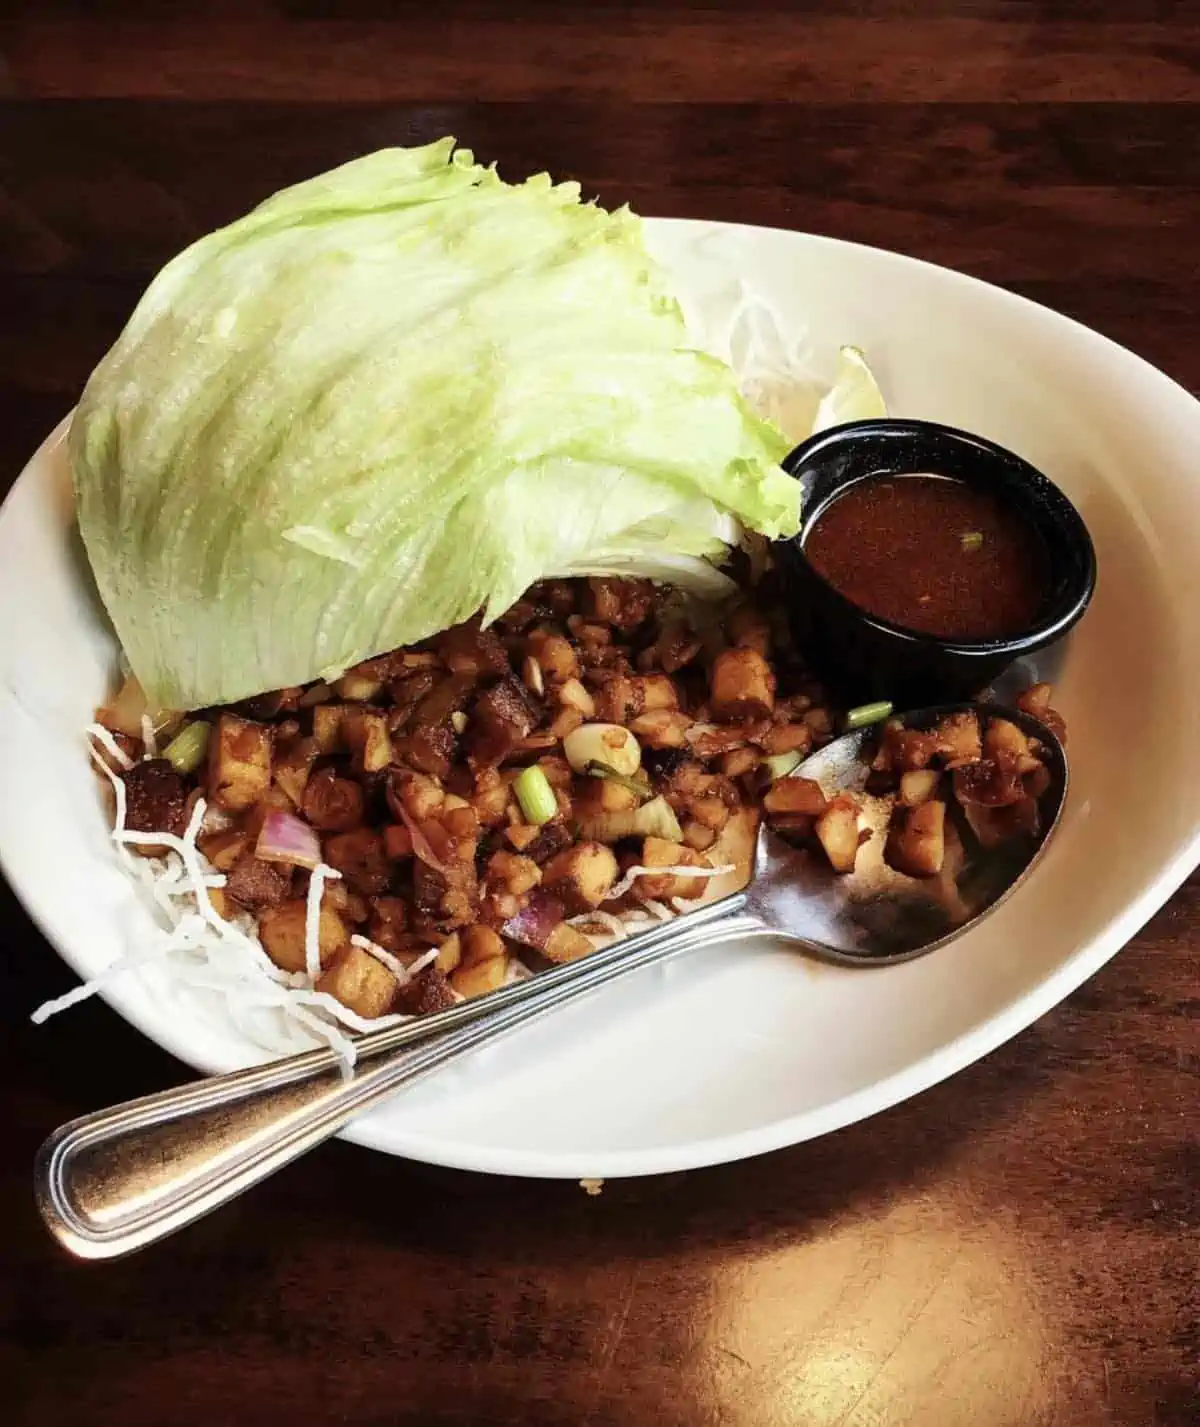 The vegan lettuce wraps served on a plate at PF Changs.